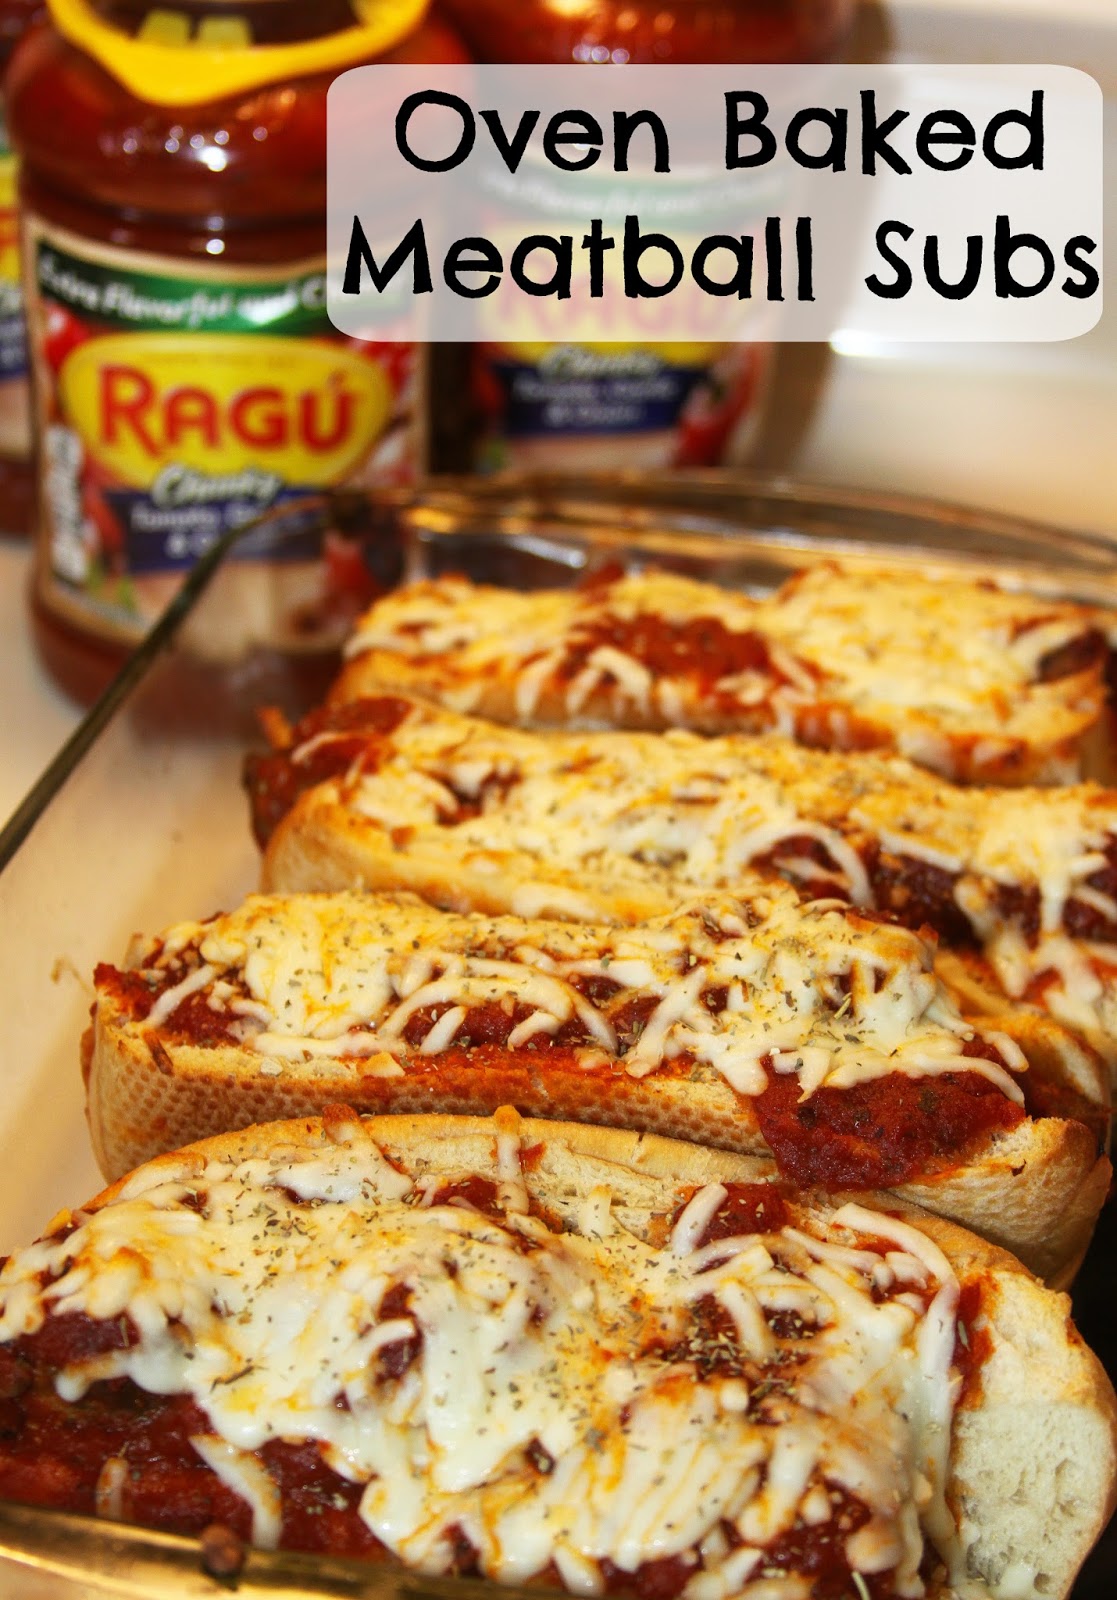 For the Love of Food: Oven Baked Meatball Subs